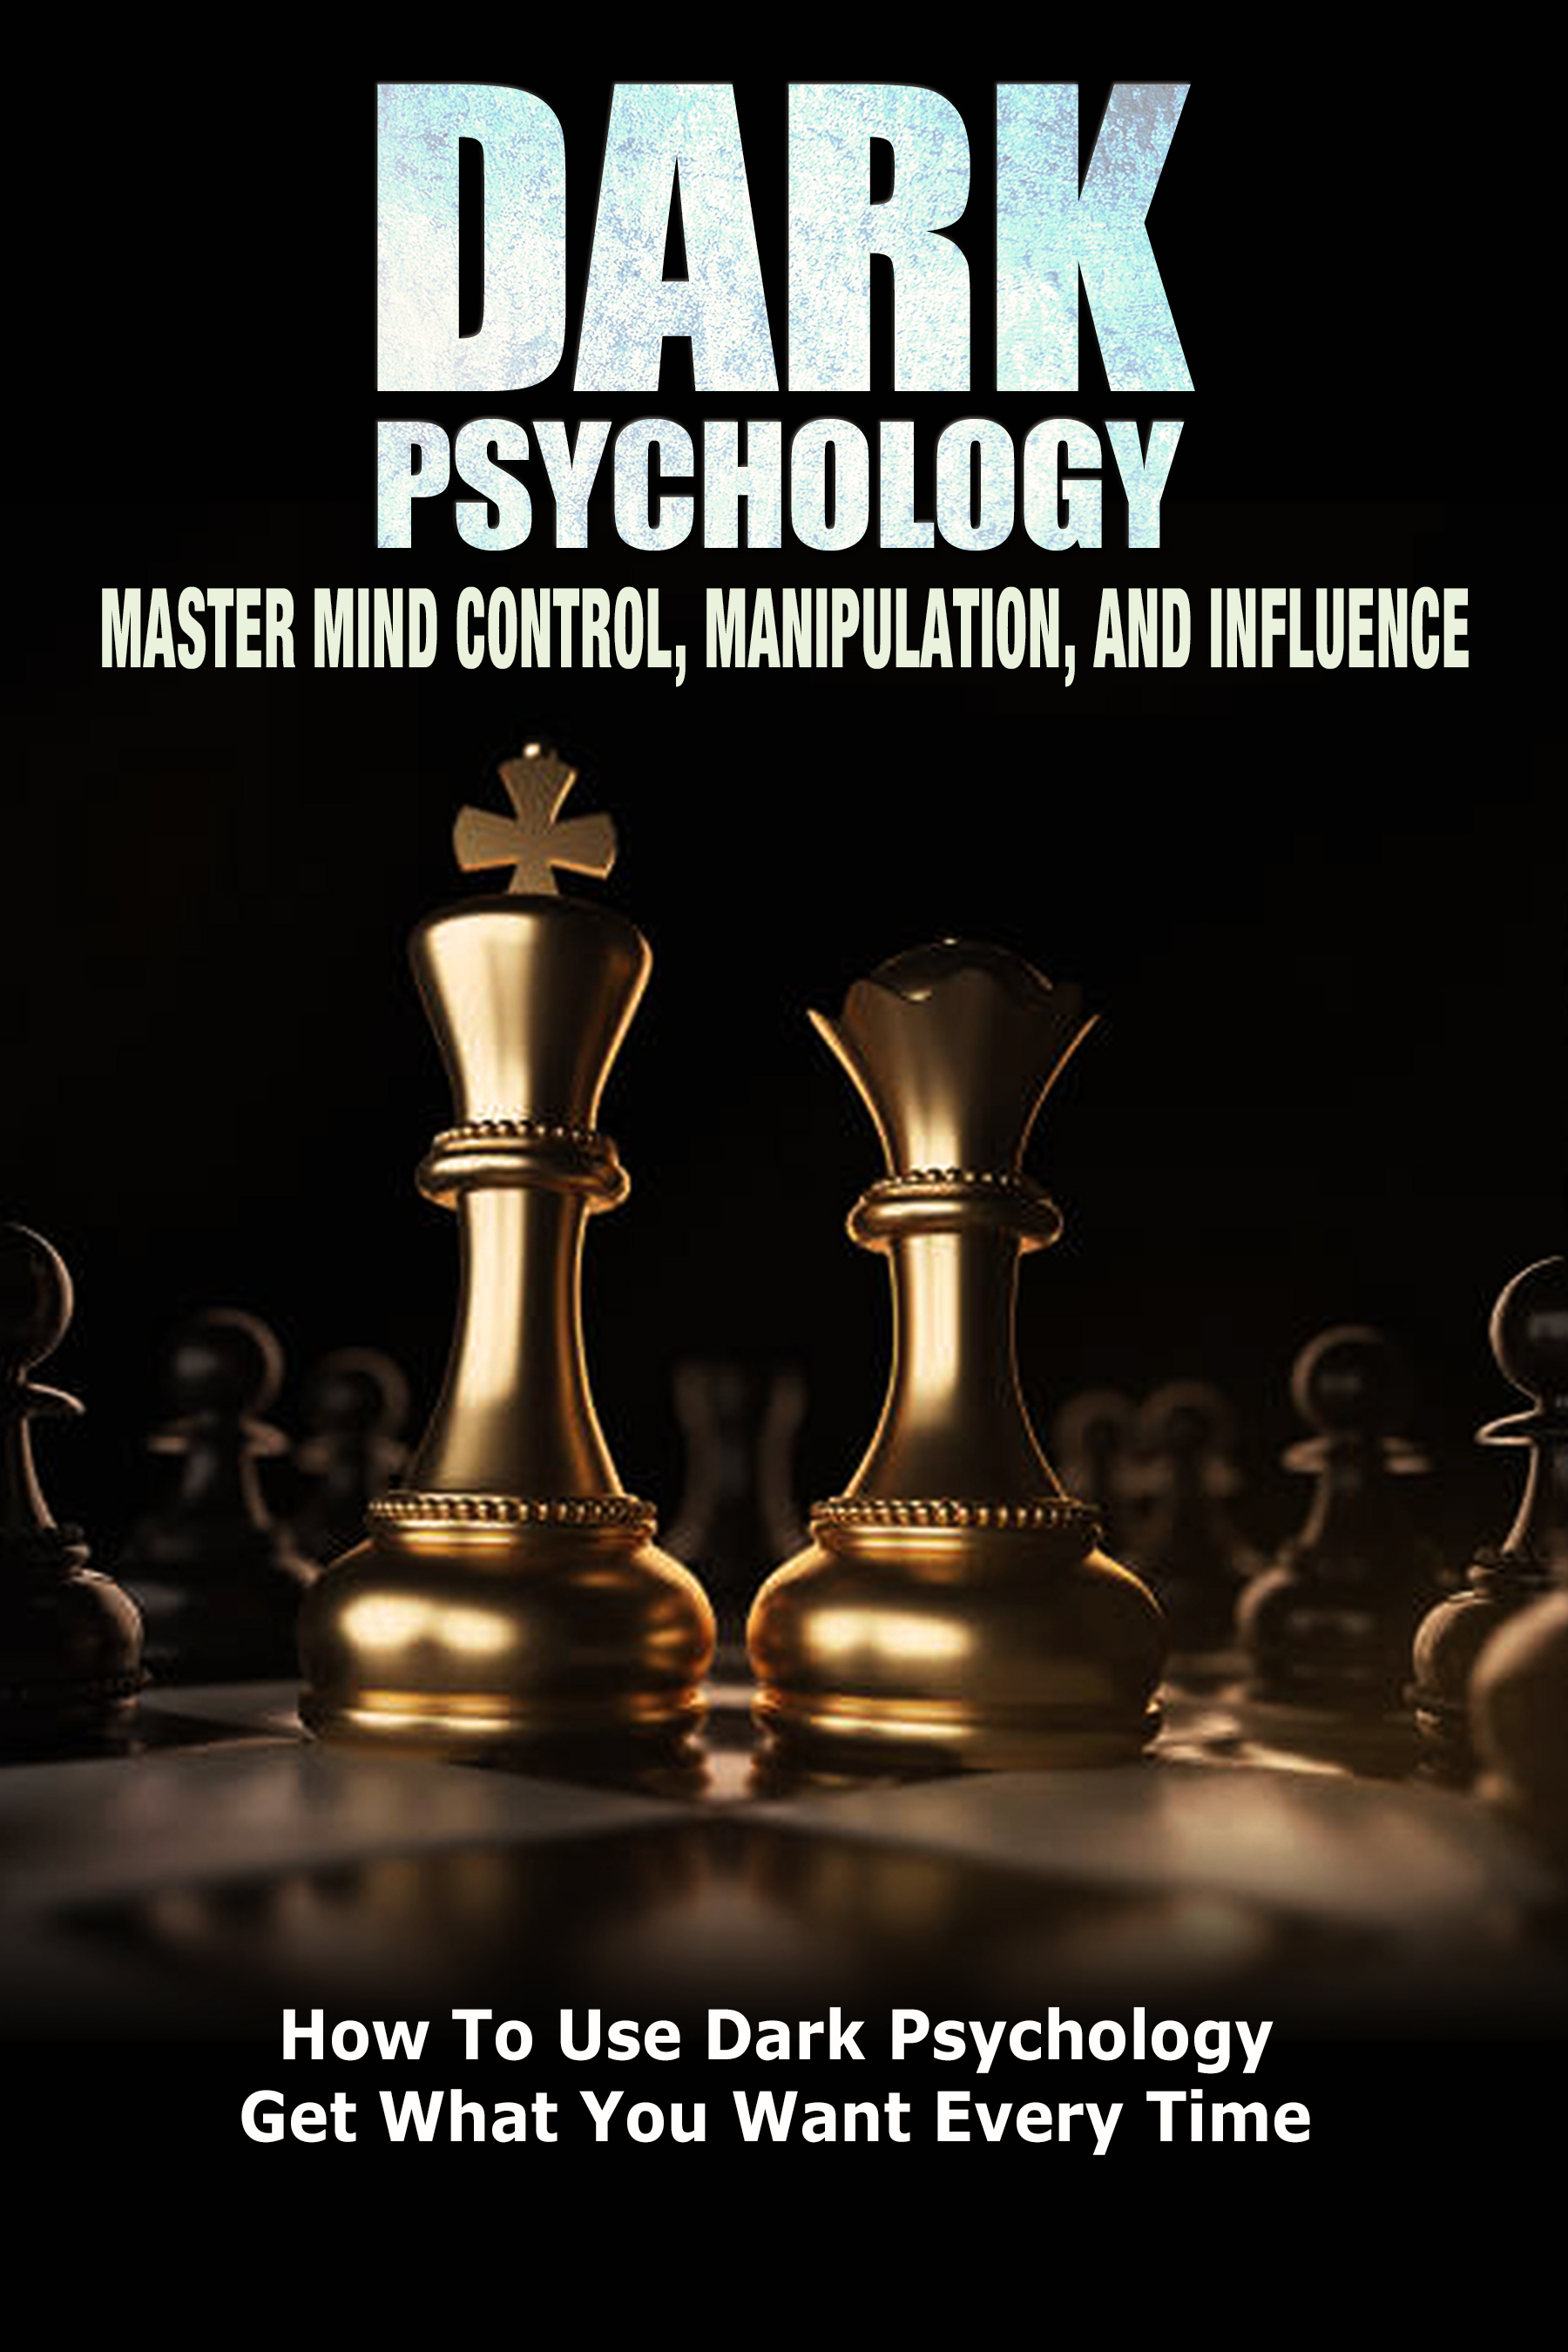 FREE: Dark Psychology: Master Mind Control, Manipulation, and Influence: How To Use Dark Psychology Get What You Want Every Time by Michael Connor